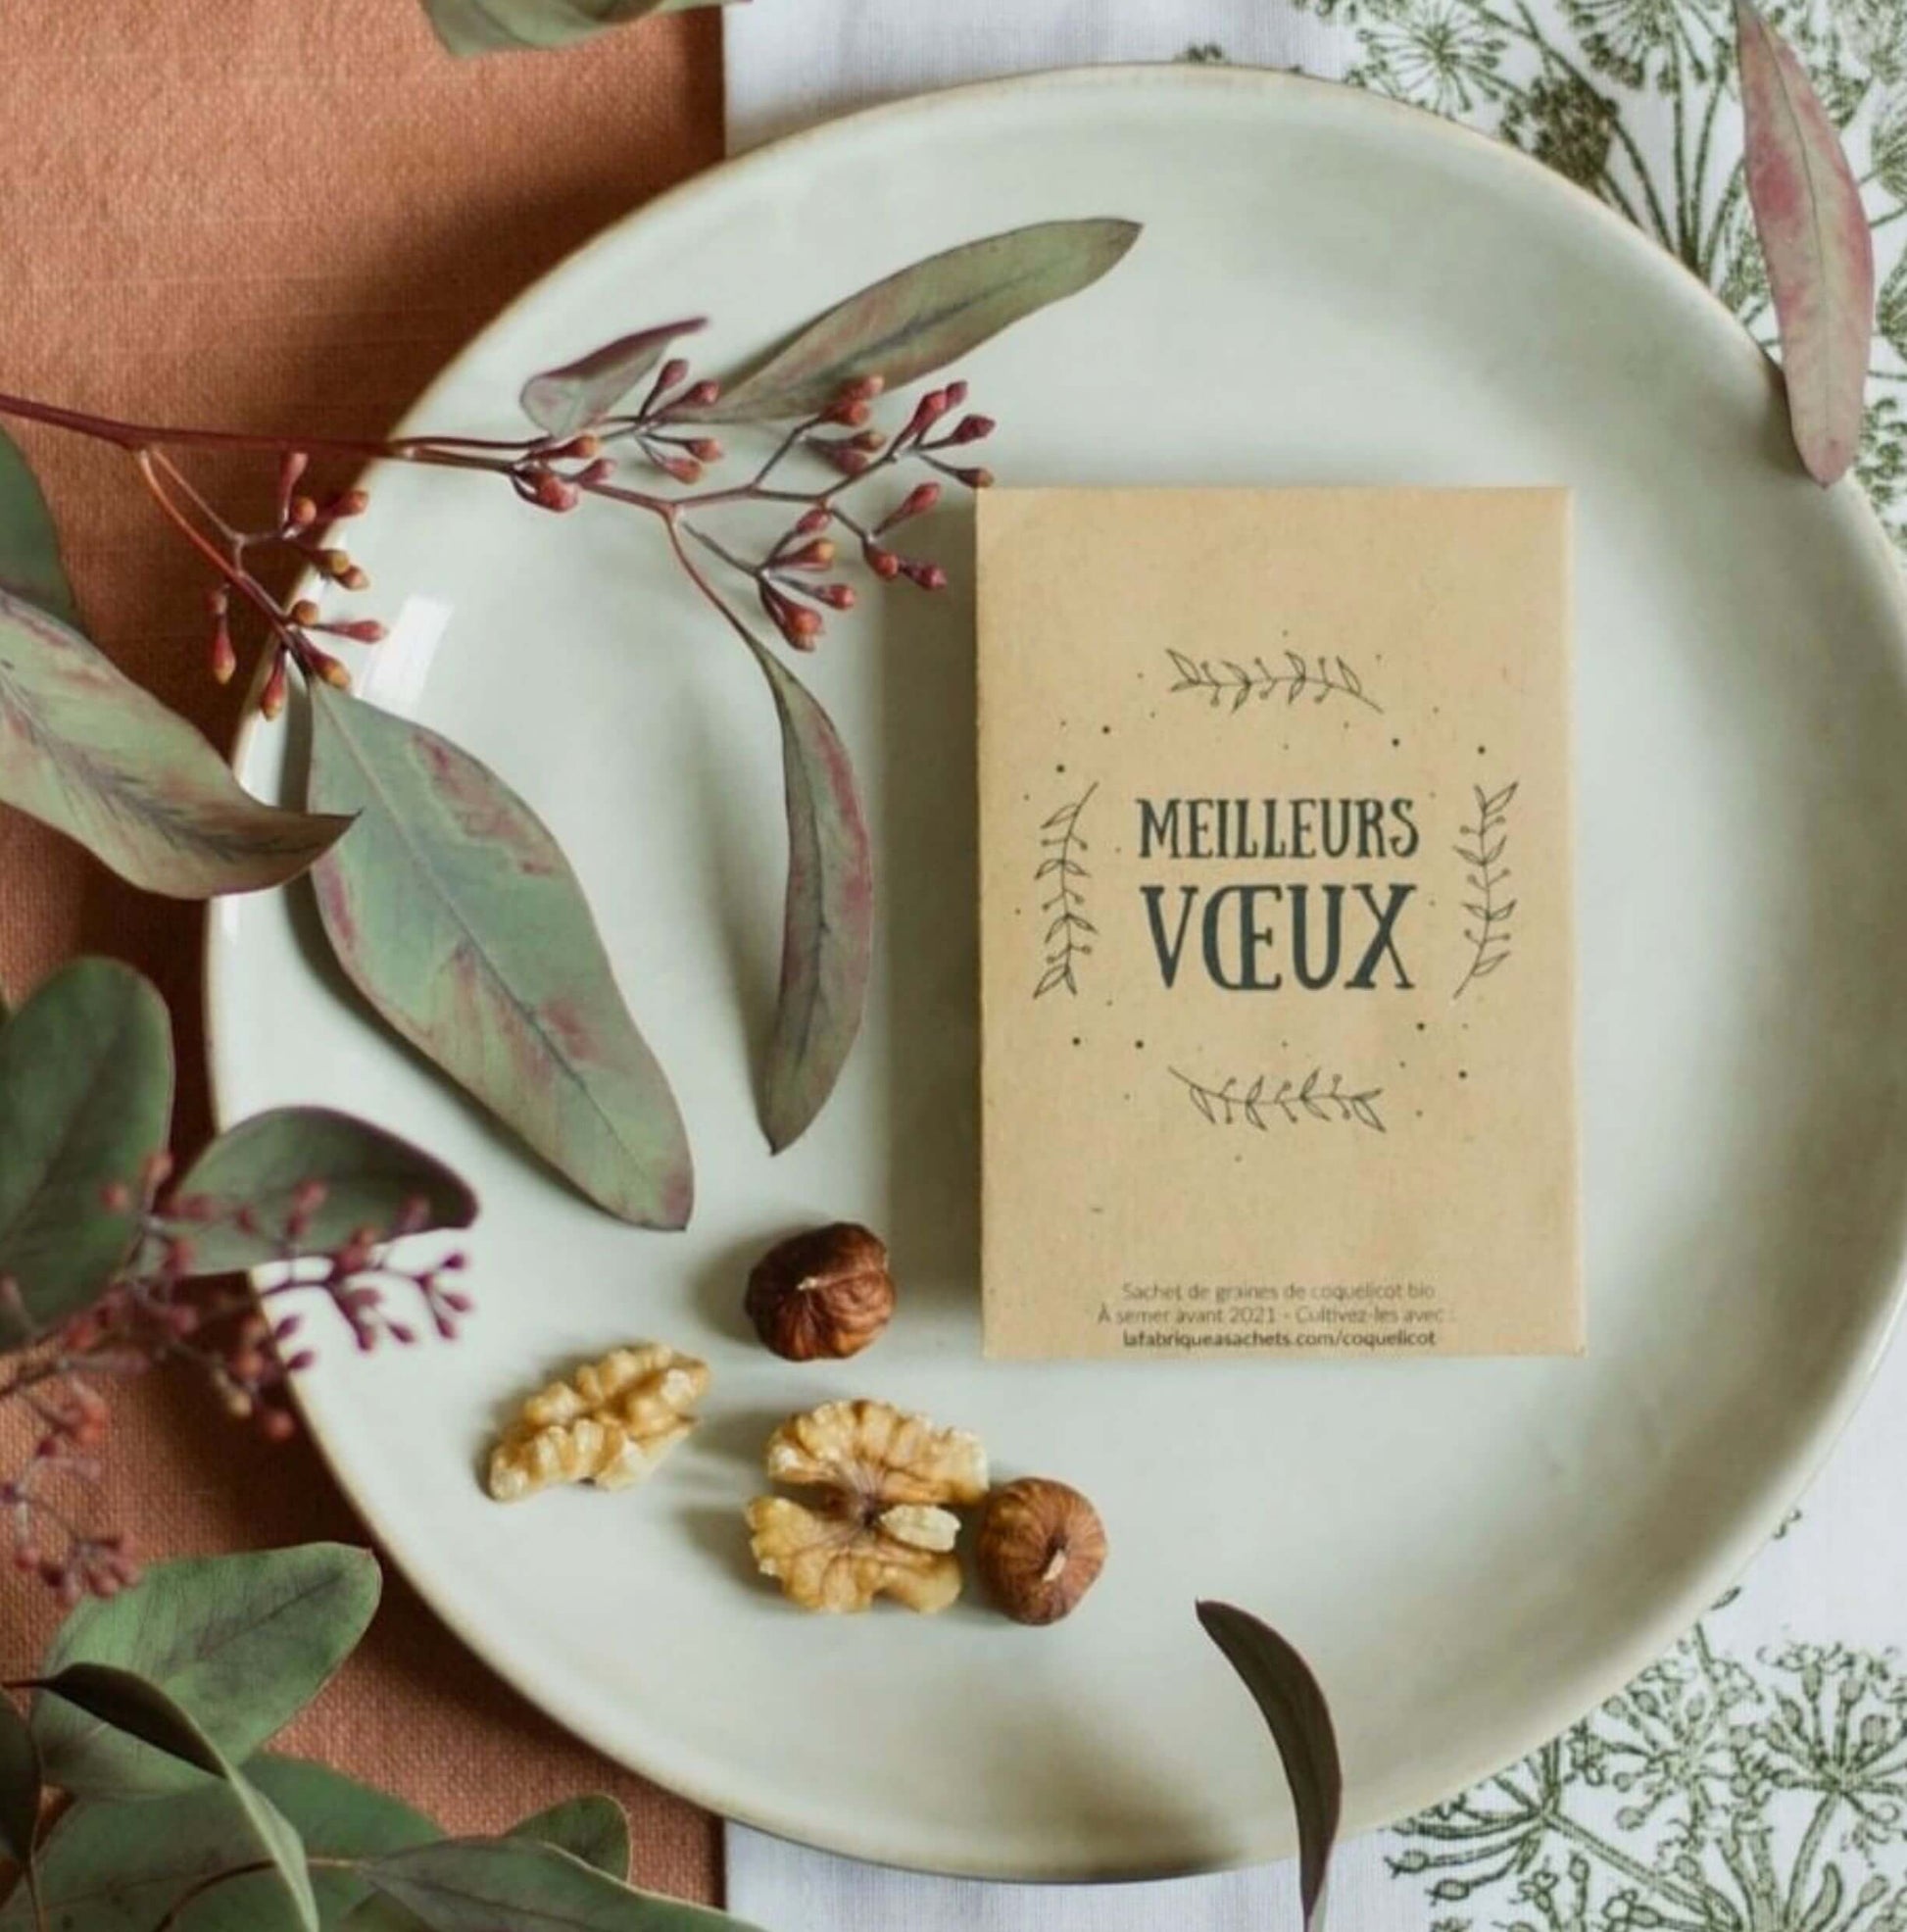 Meilleurs vœux - seed bag wish card - Unik by Nature